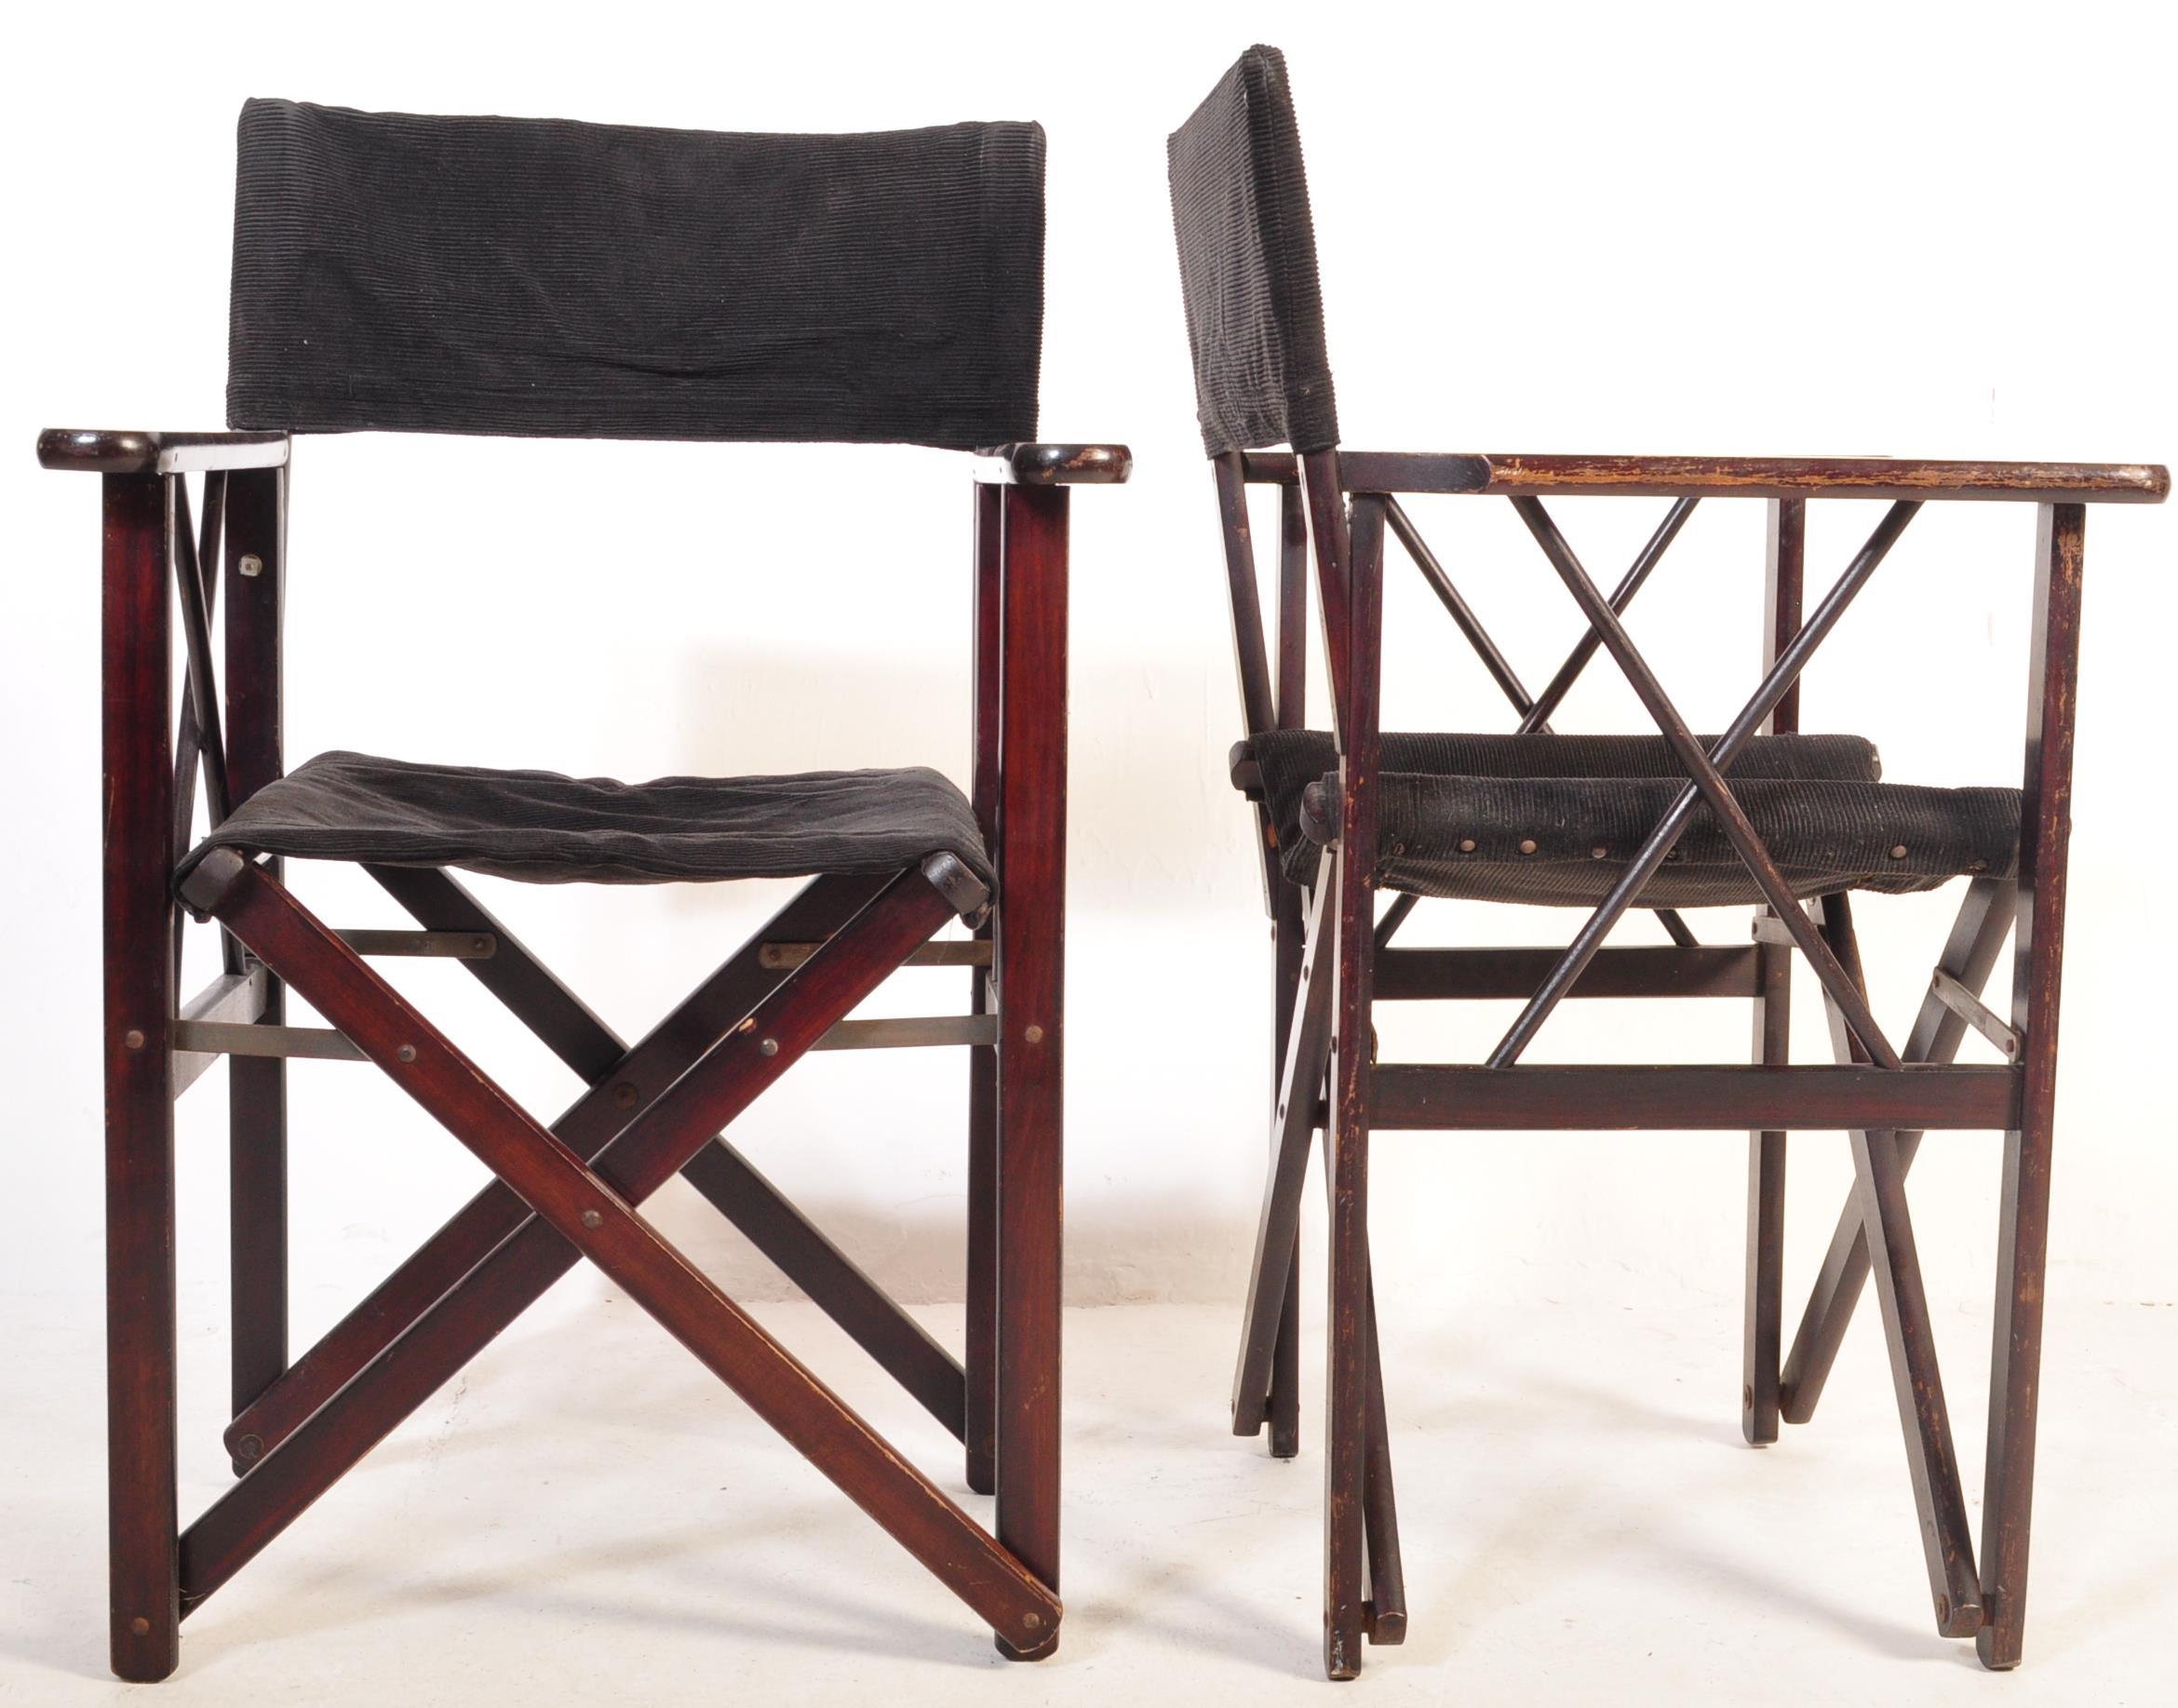 VINTAGE MID CENTURY FOLDING DIRECTORS CHAIRS & TABLE - Image 9 of 14